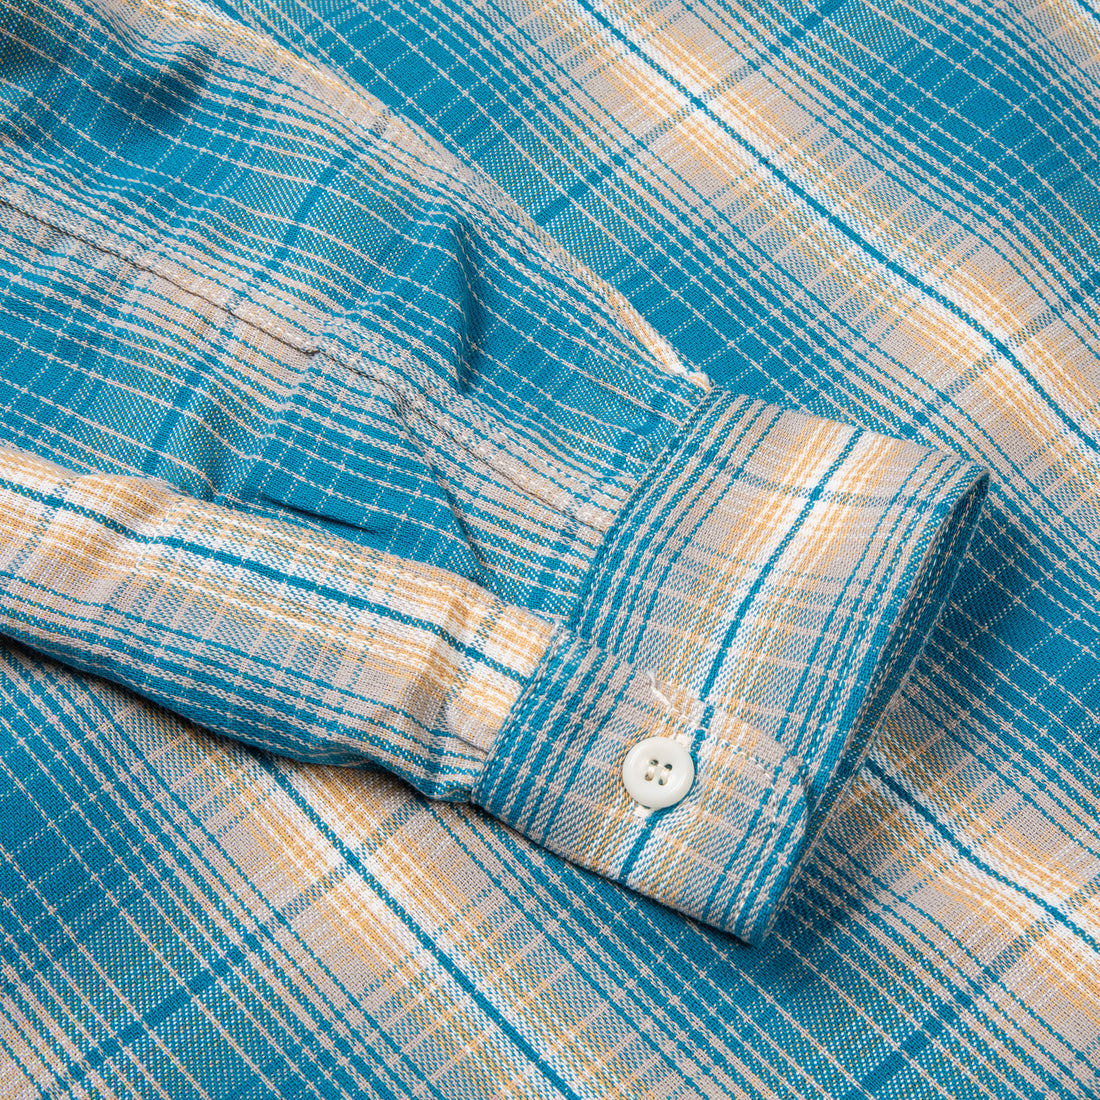 The Real McCoy´s 8HU Ombre Check Summer Flannel Shirt Turquoise